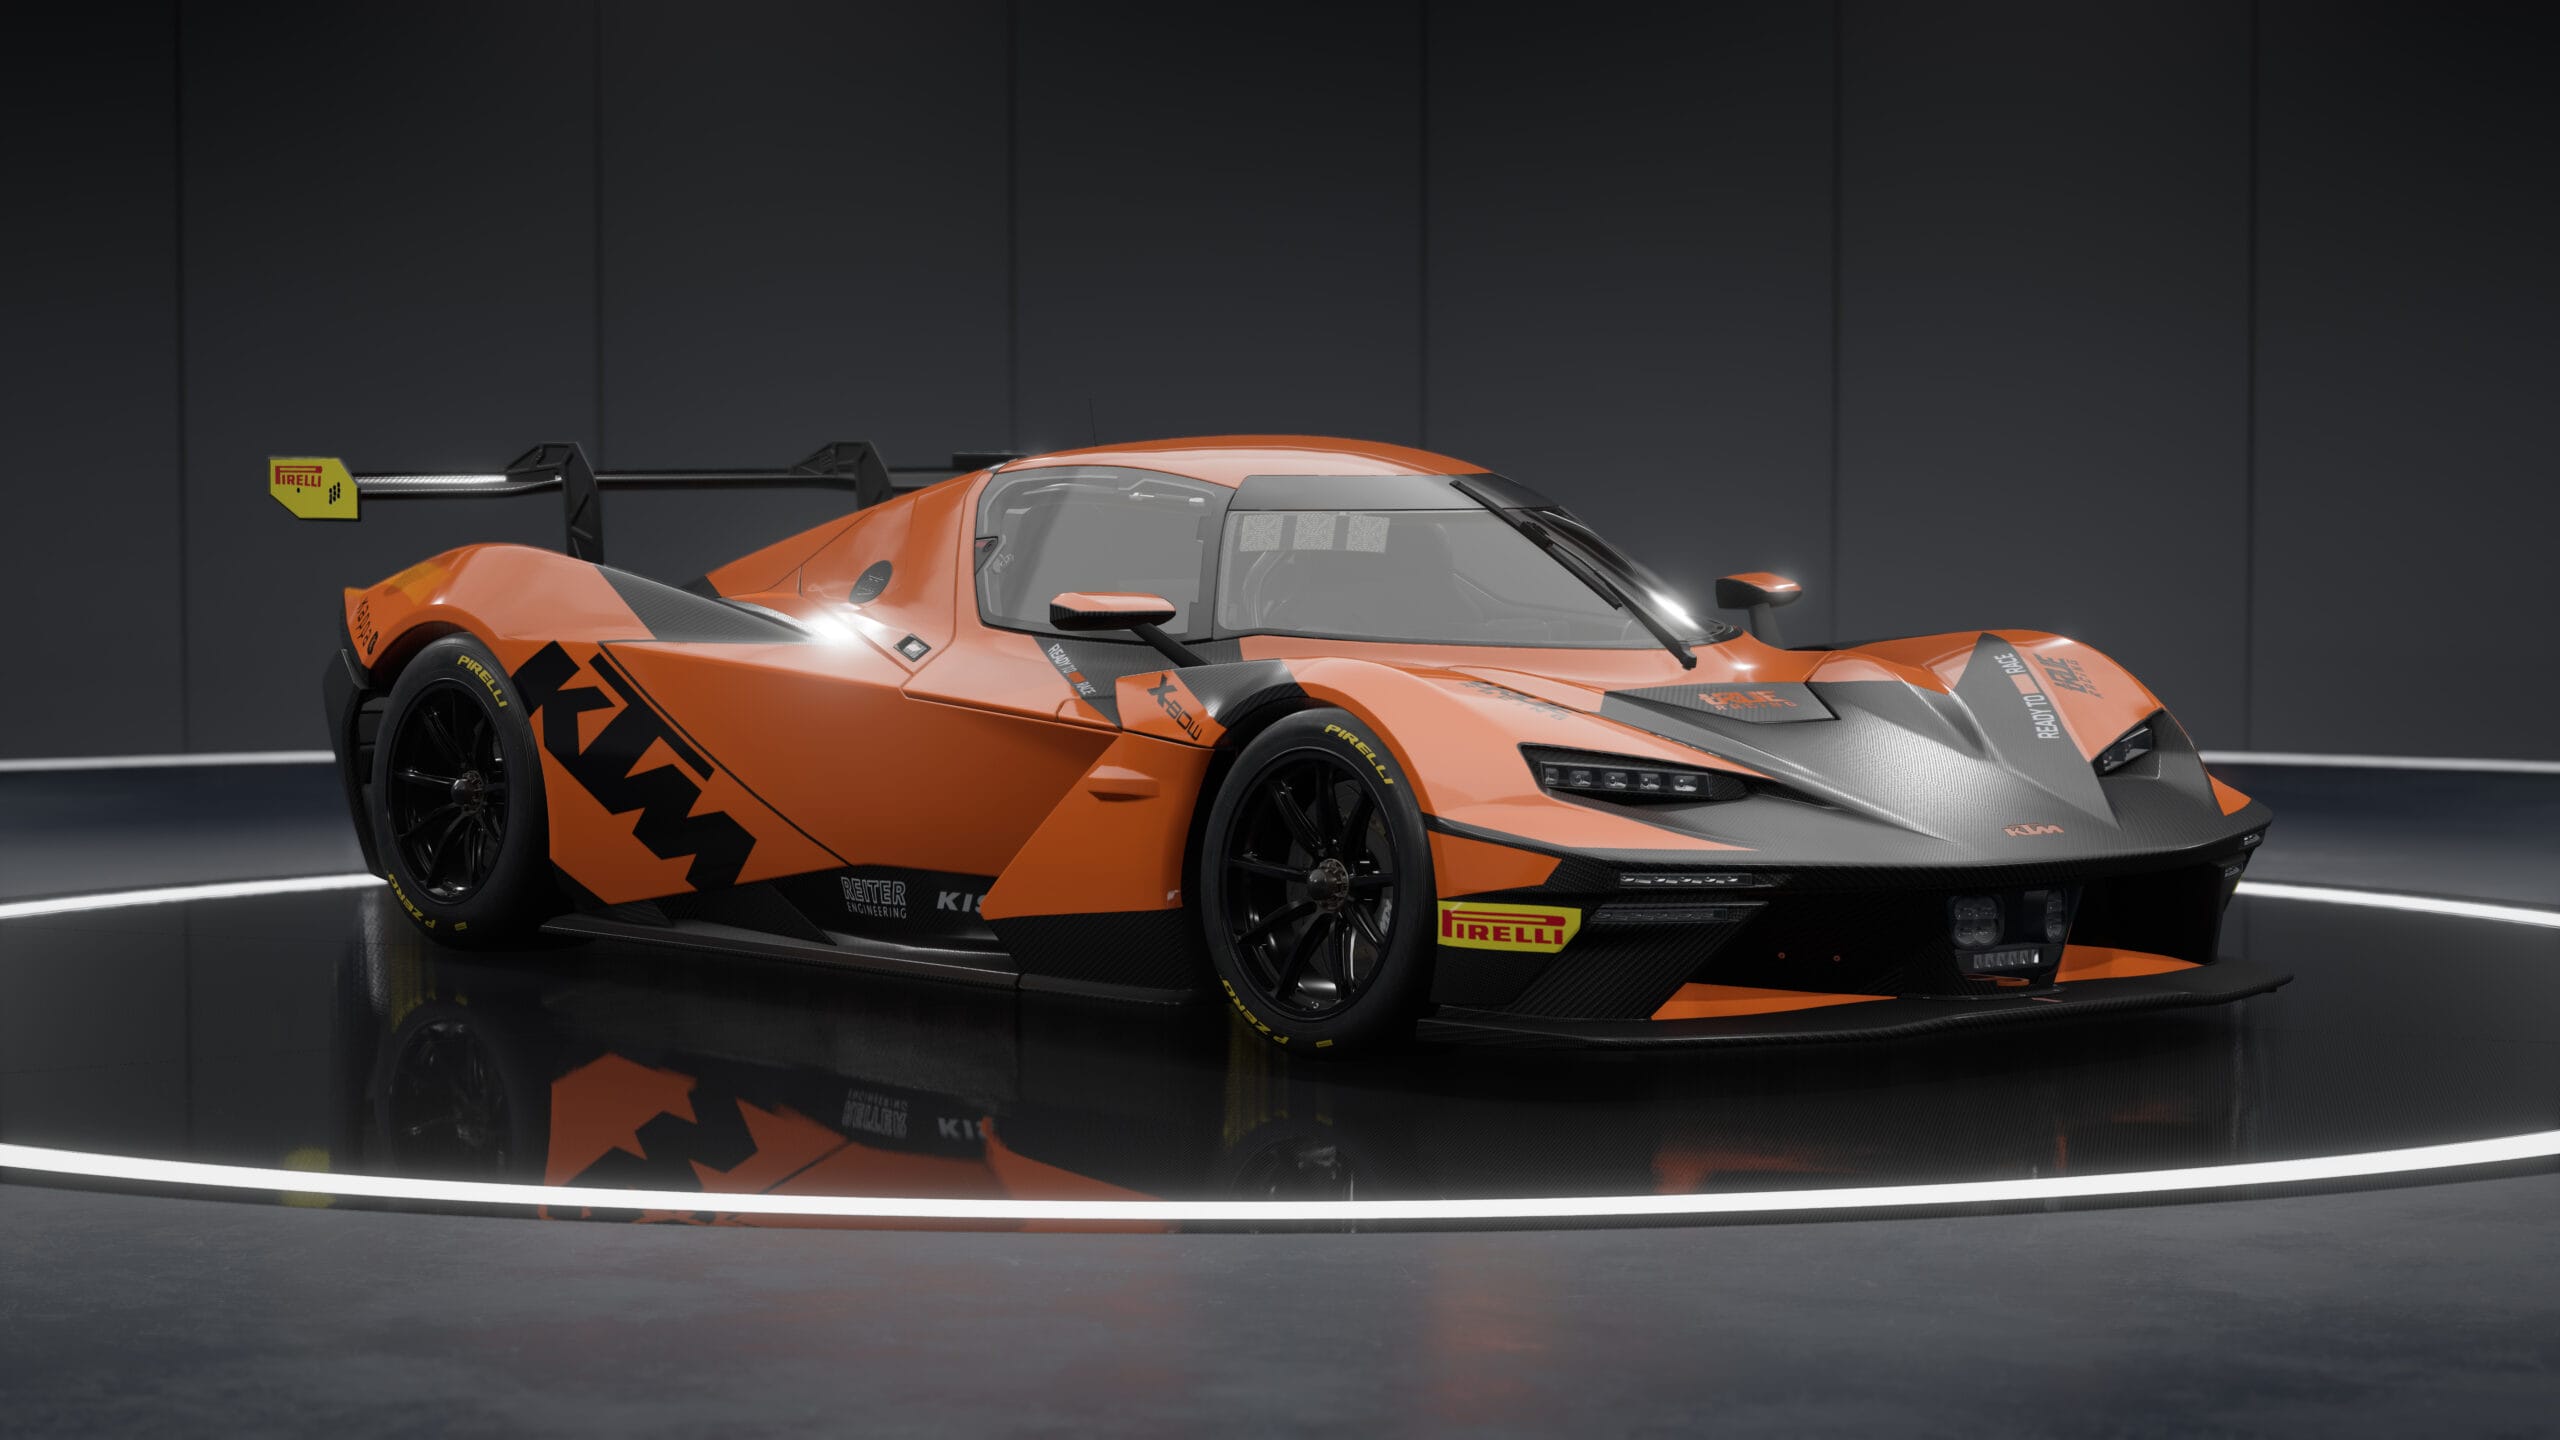 General 2560x1440 KTM X-Bow supercars Assetto Corsa Competizione video games British cars Kunos Simulazioni car 505 Games video game art vehicle video game car Assetto Corsa screen shot frontal view reflection headlights race cars CGI